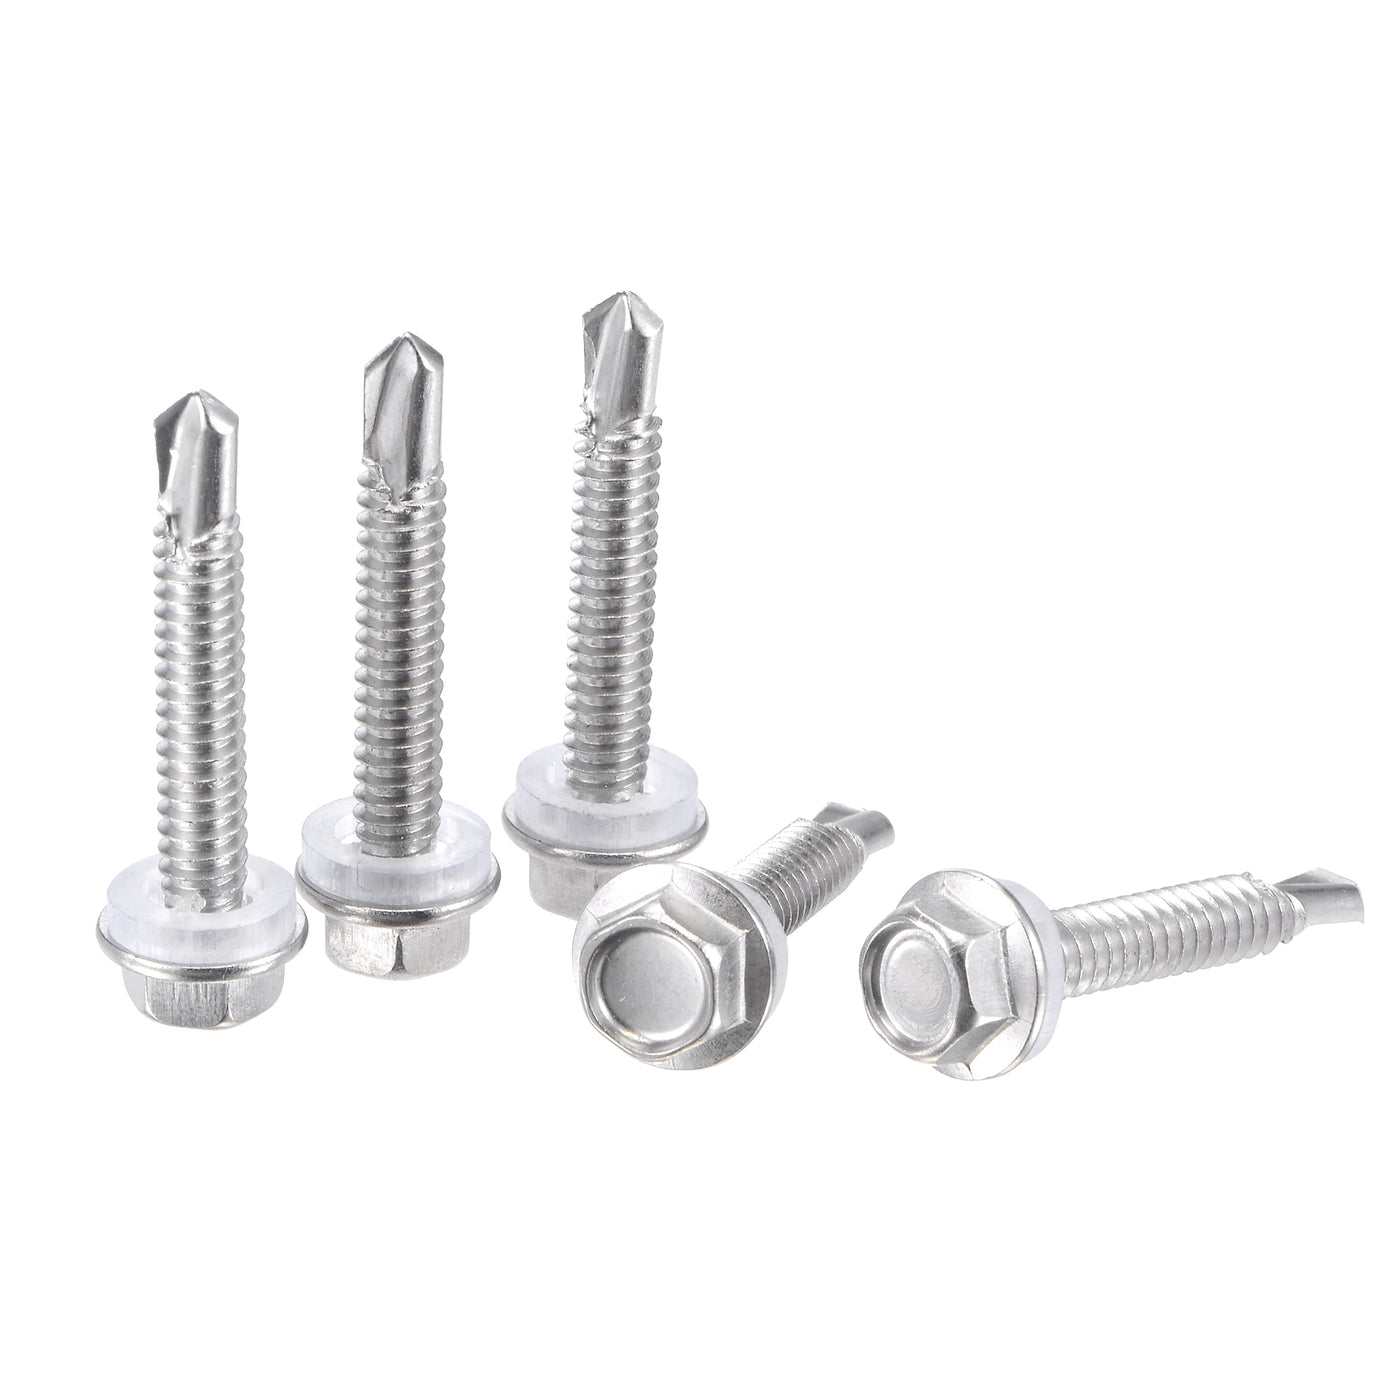 uxcell Uxcell #12 x 1 17/64" 410 Stainless Steel Hex Washer Head Self Drilling Screws 50pcs